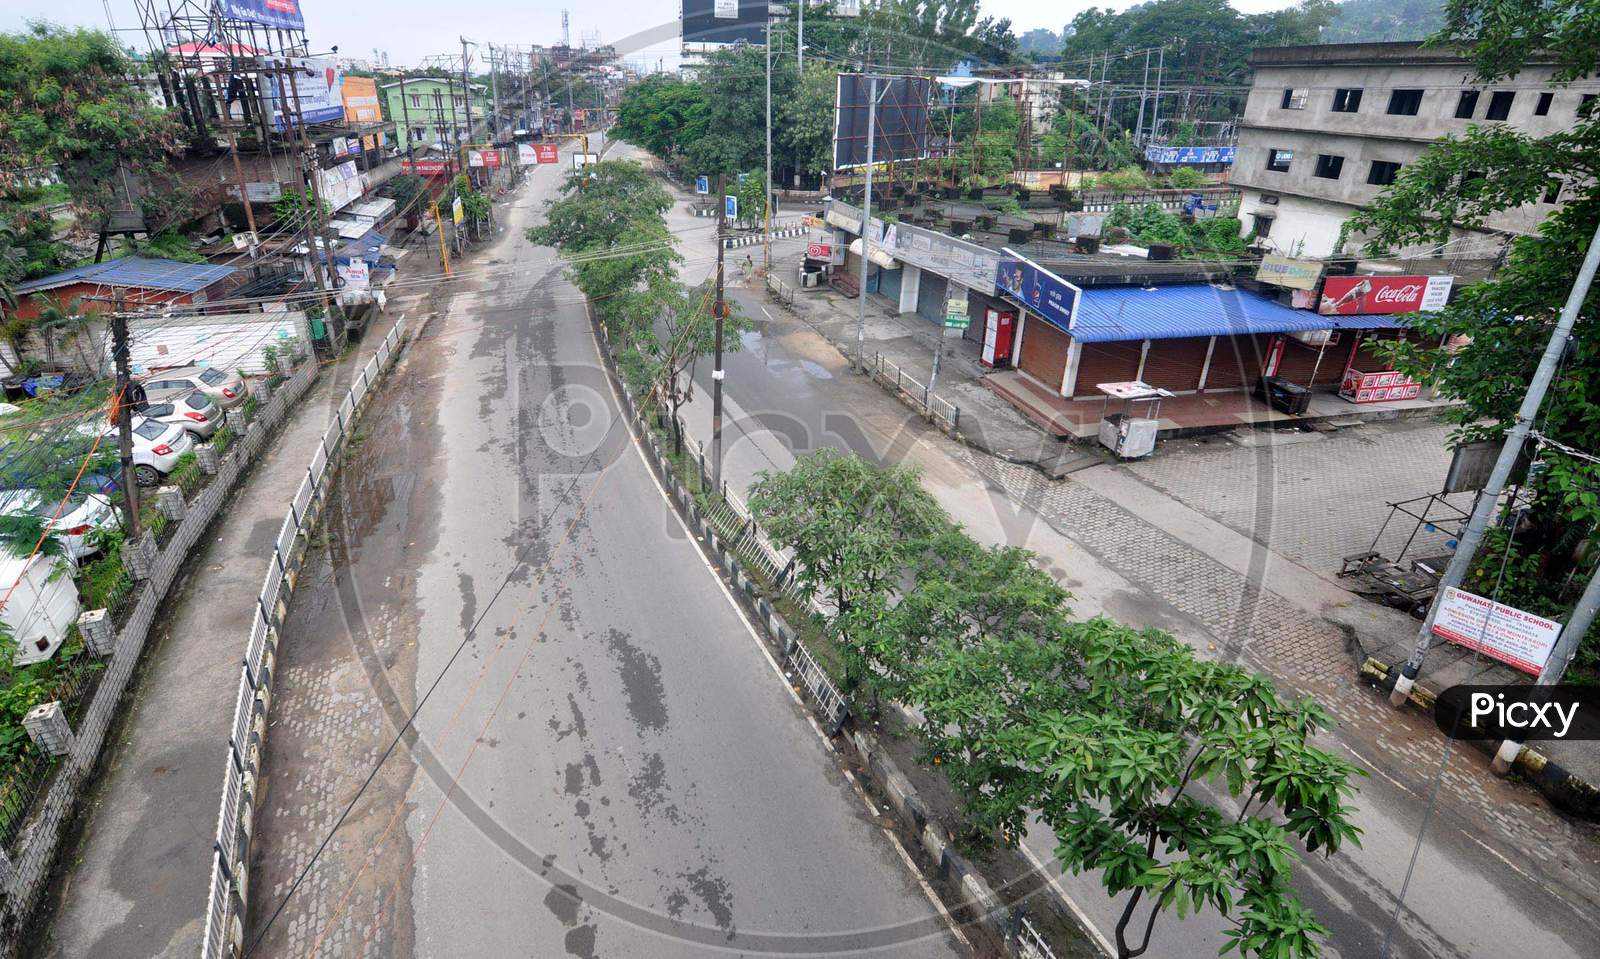 A Deserted Road is pictured Following The Assam Government's Decision To Impose Total Lockdown To Curb The Spread Of Novel Coronavirus, In Guwahati on June 29, 2020.